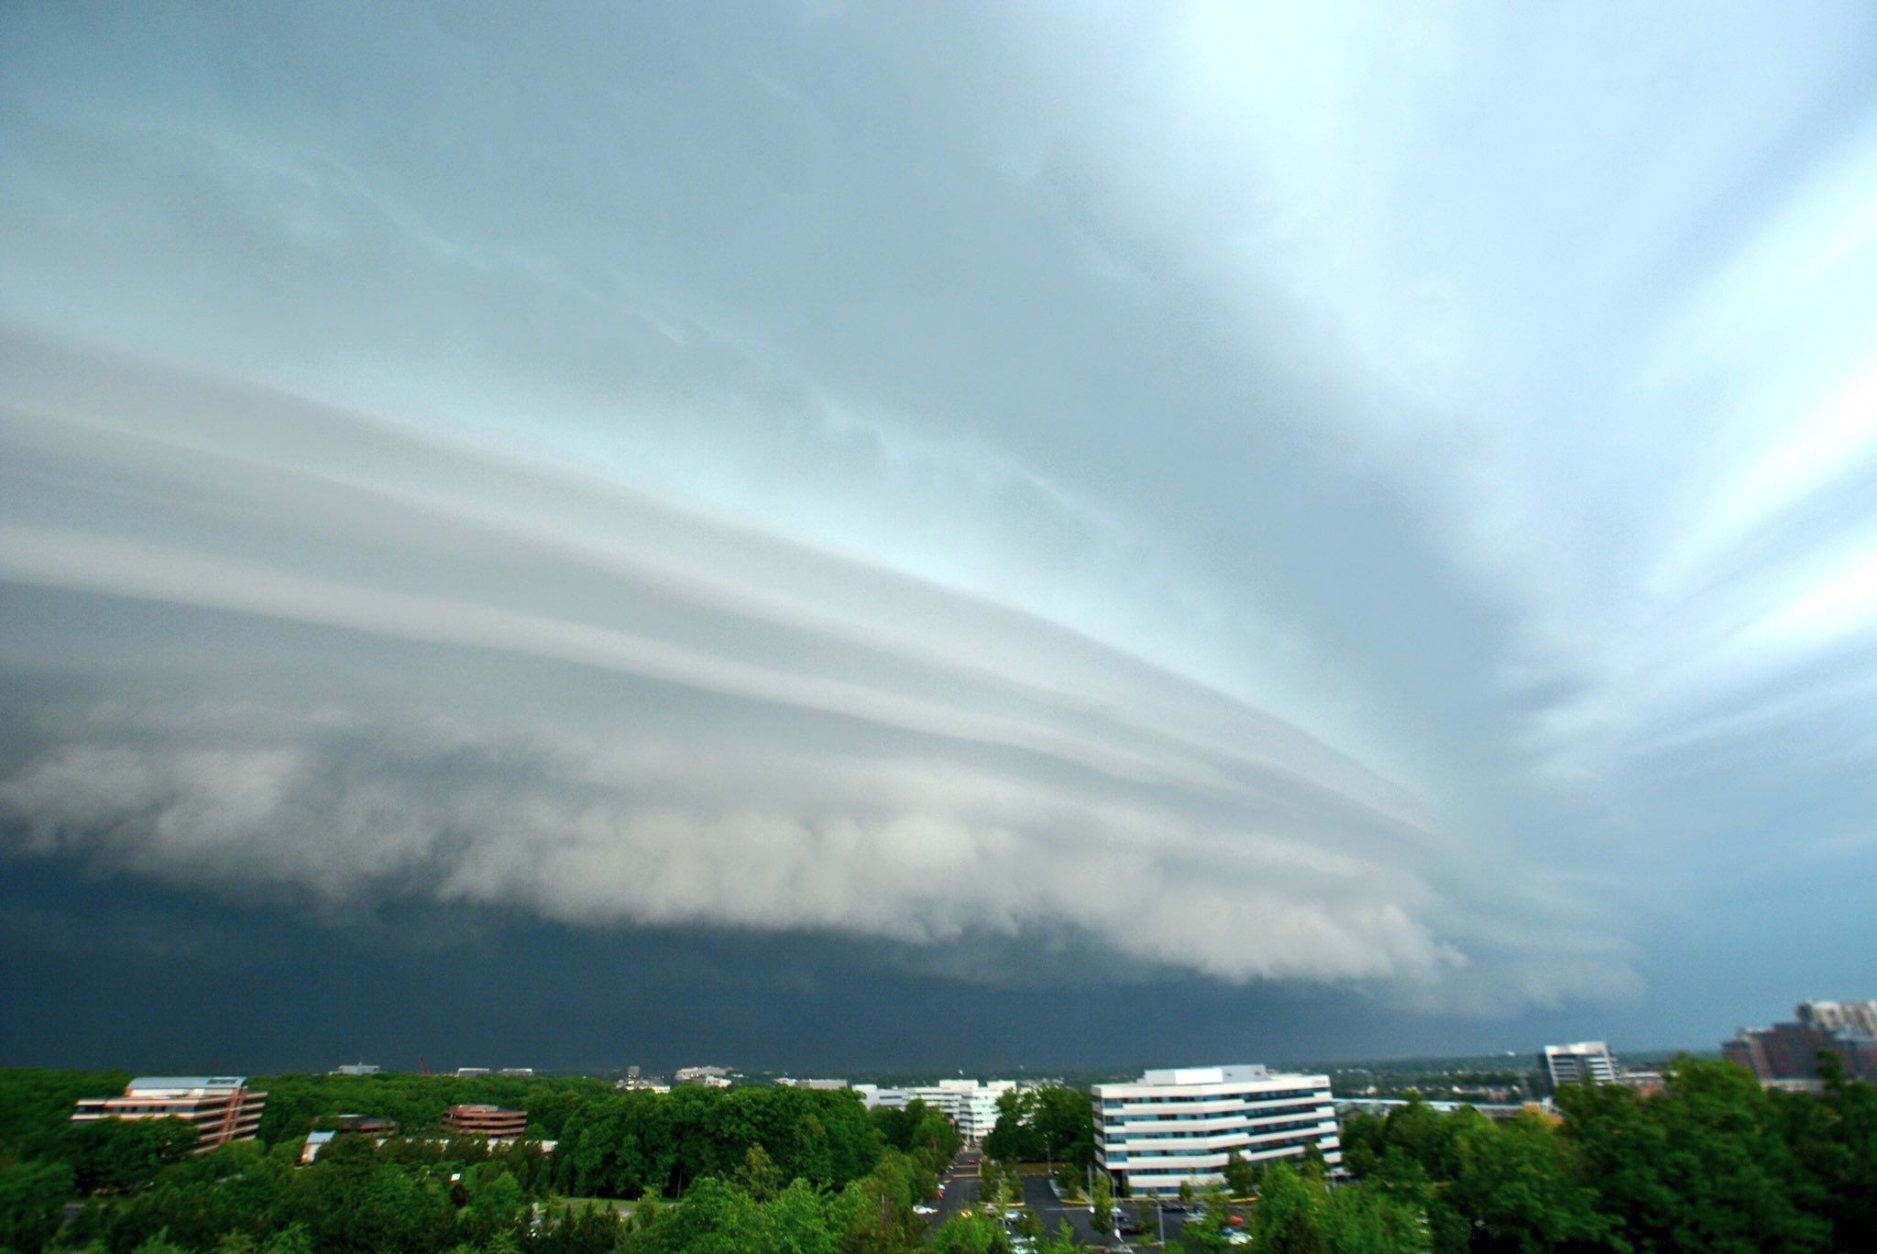 Storm clouds gather over Reston, Va., as strong storms rolled through the D.C. area Monday night. (WTOP/Dave Dildine)